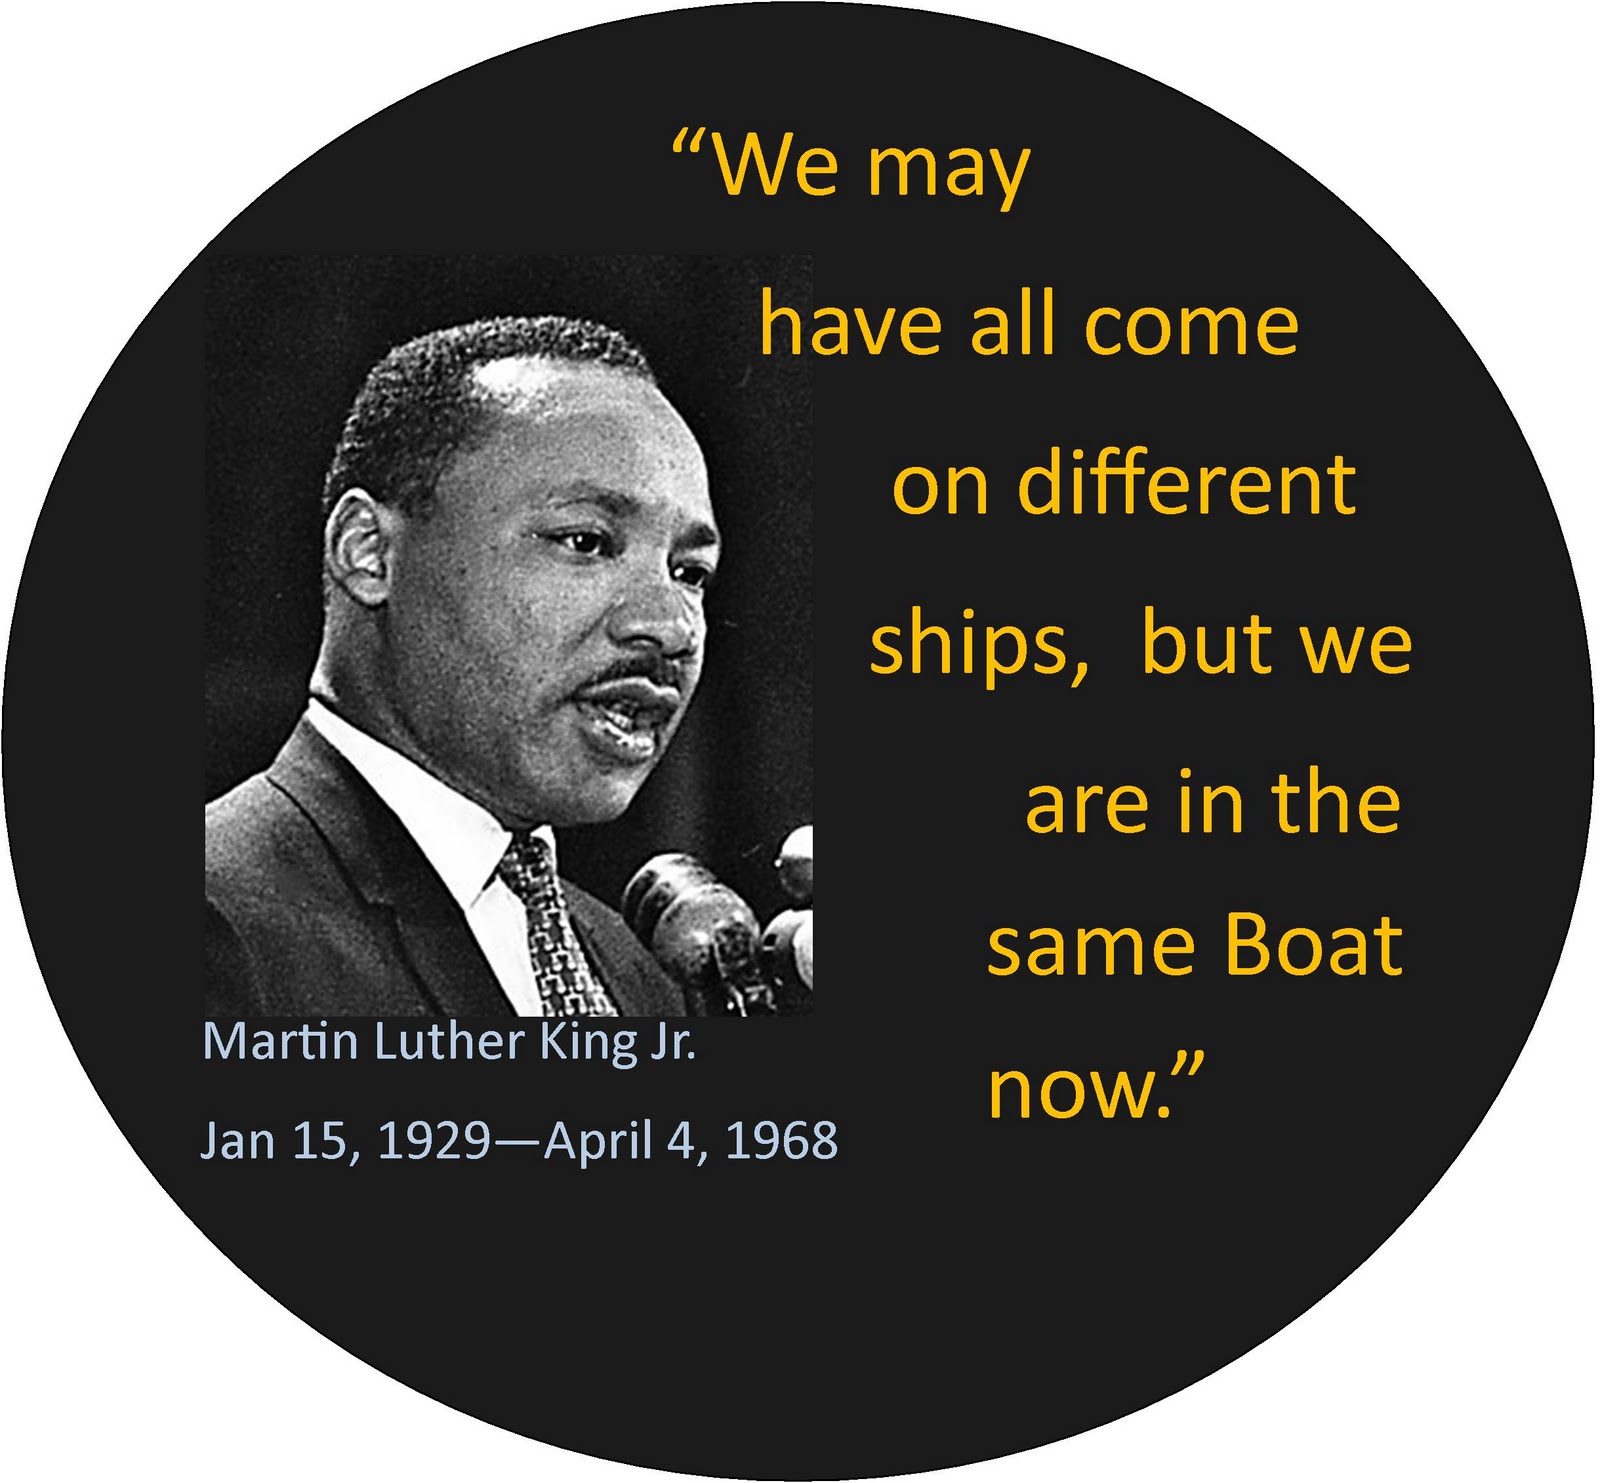 clip art martin luther king jr - photo #45